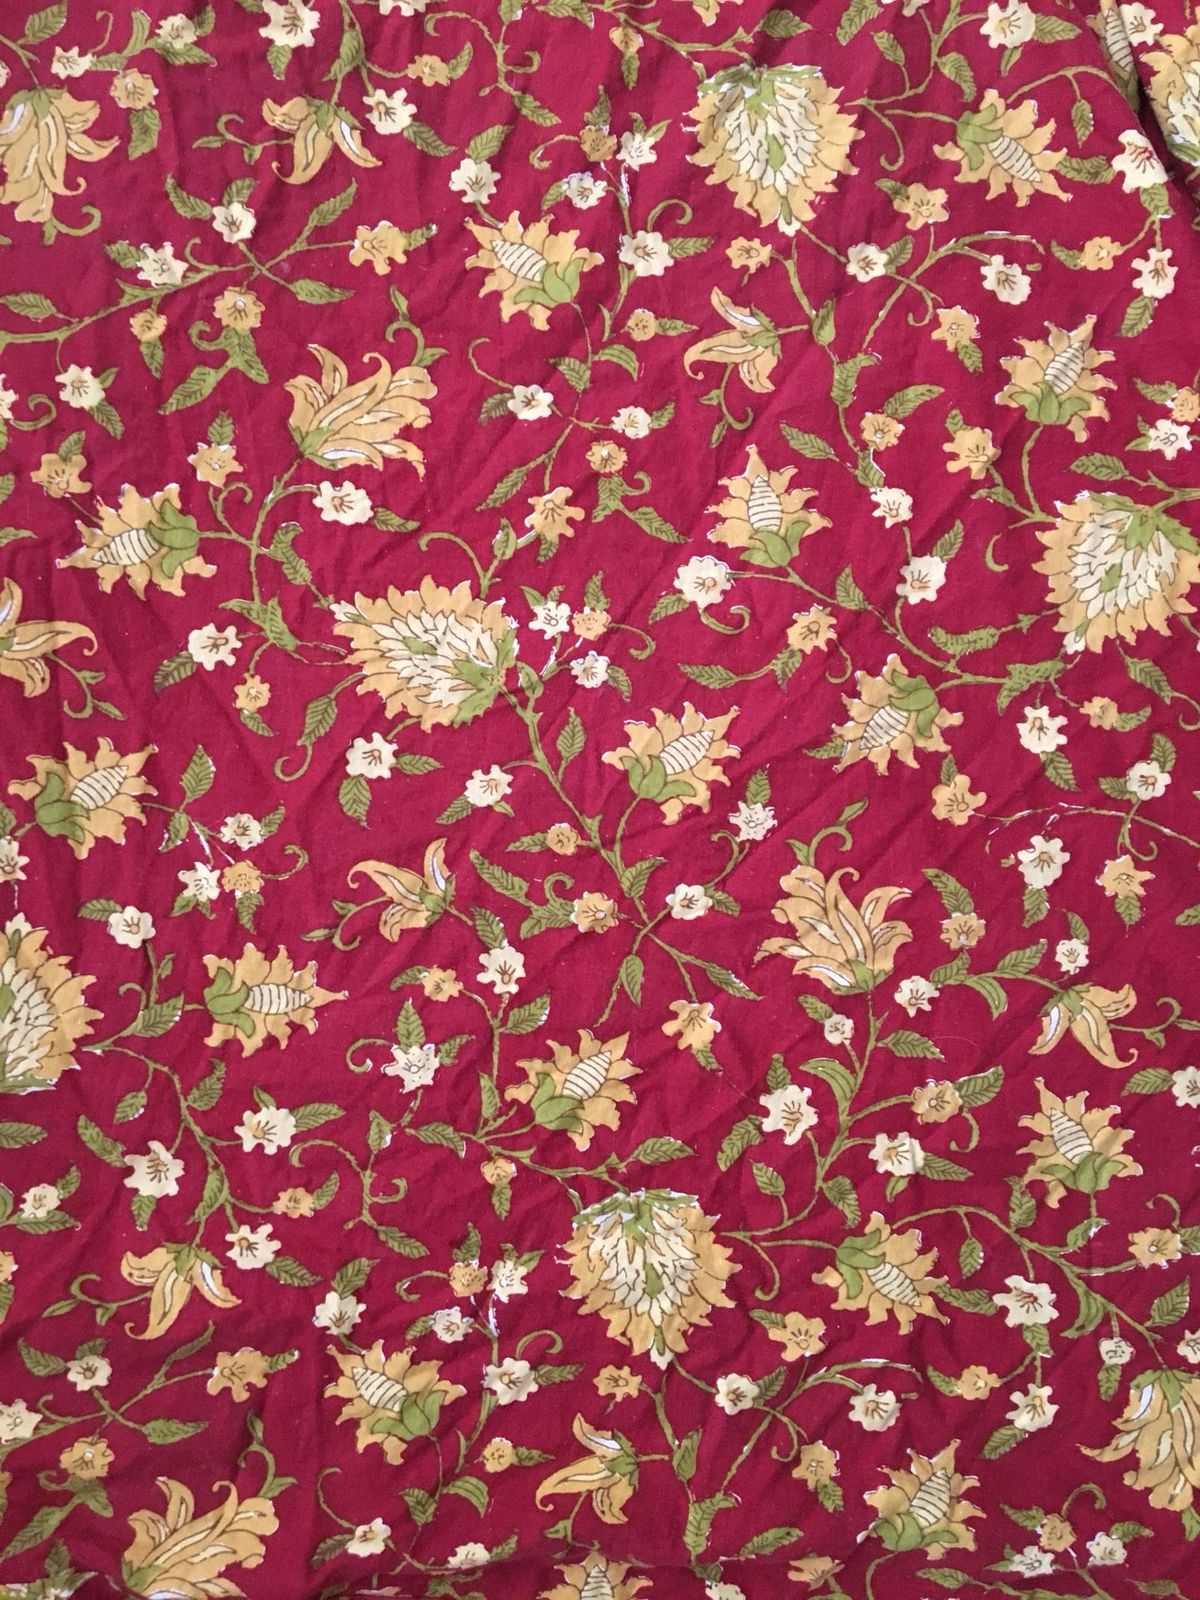 Primary image for Pottery Barn Colette Floral Red Multi Linen Blend Twin Duvet Cover